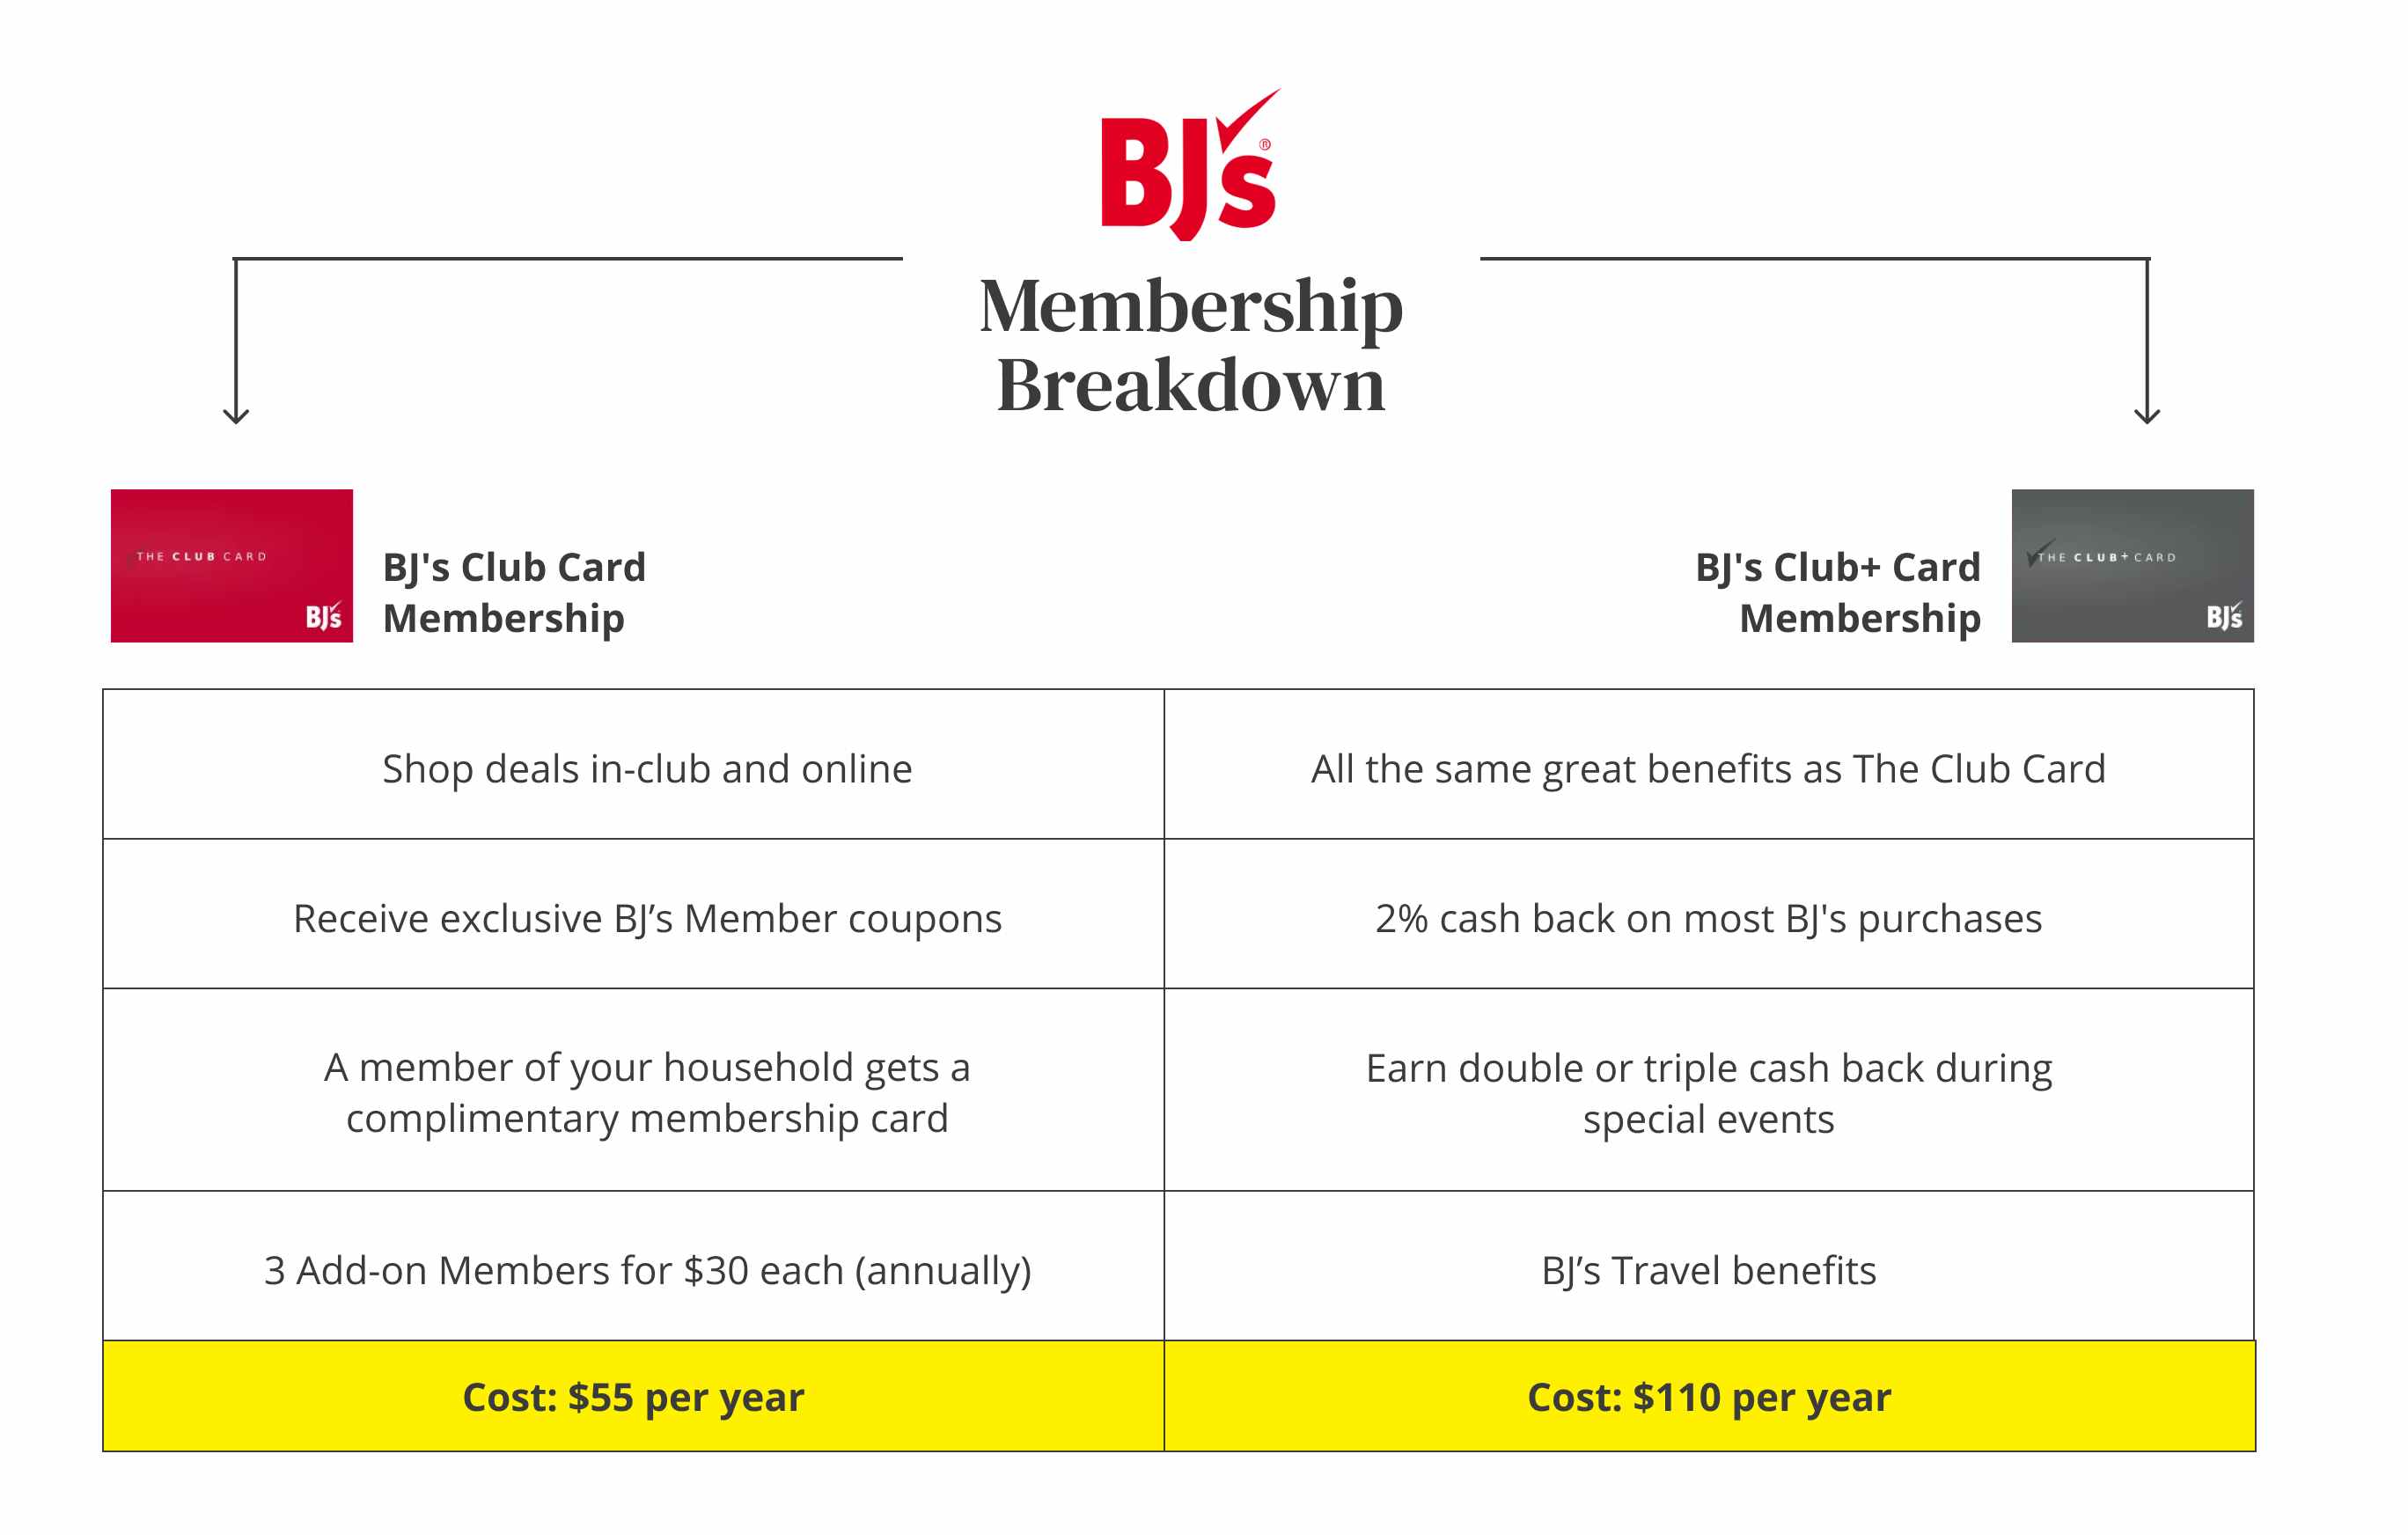 A comparison of the BJ's Club Card and the BJ's Club Plus Card memberships.